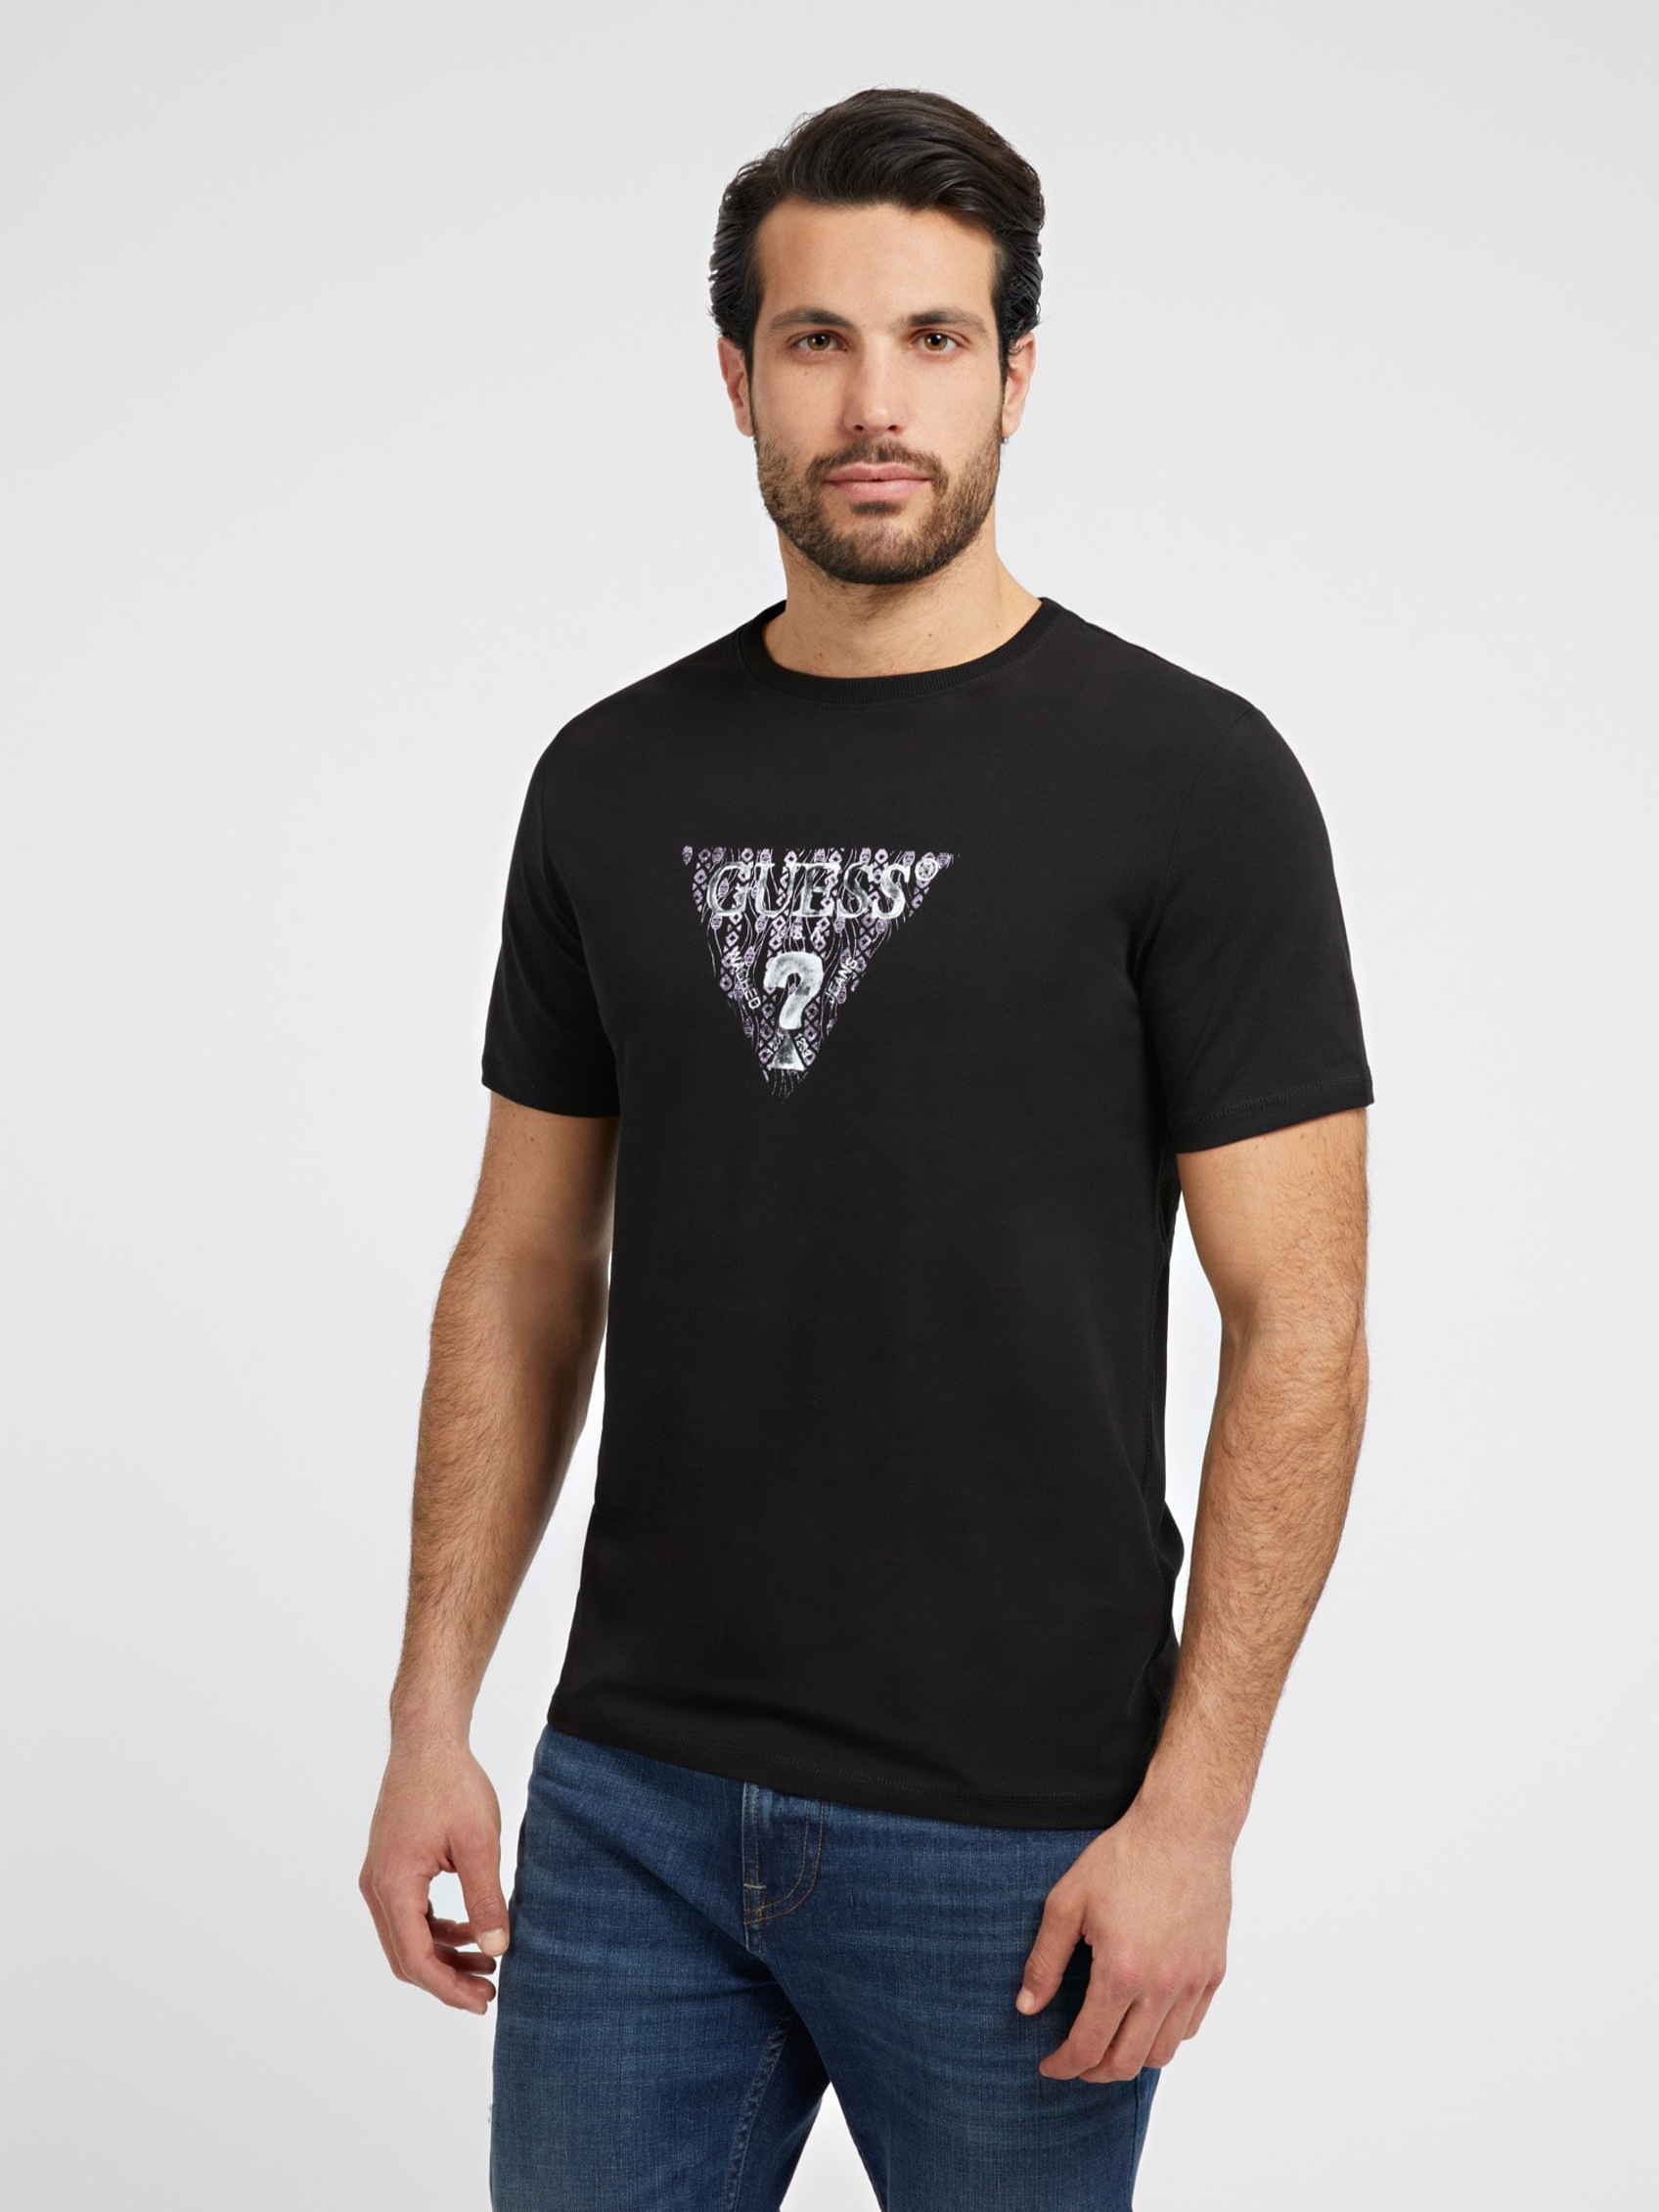 CREW NECK GUESS GEO TRIANGLE TEE | Guess Philippines